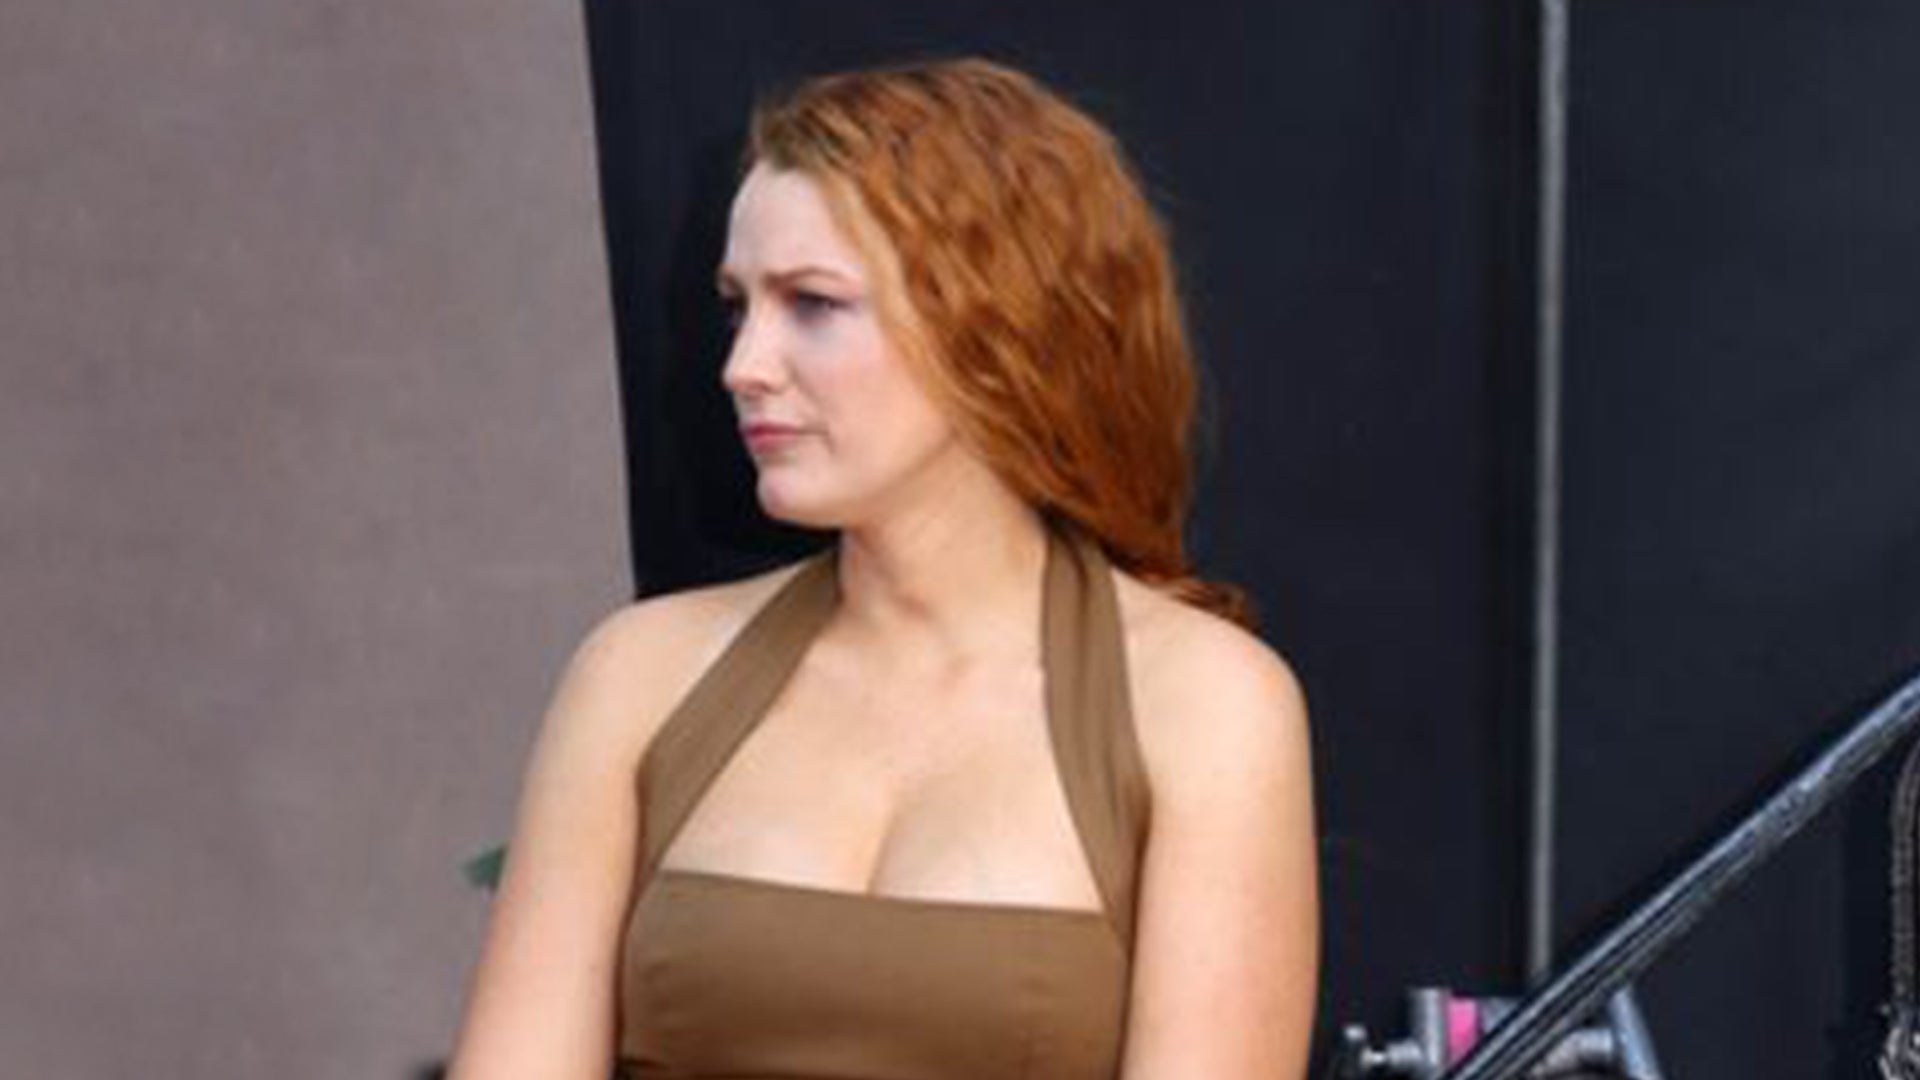 Blake Lively Rocks Red Hair for New Movie It Ends With pic image